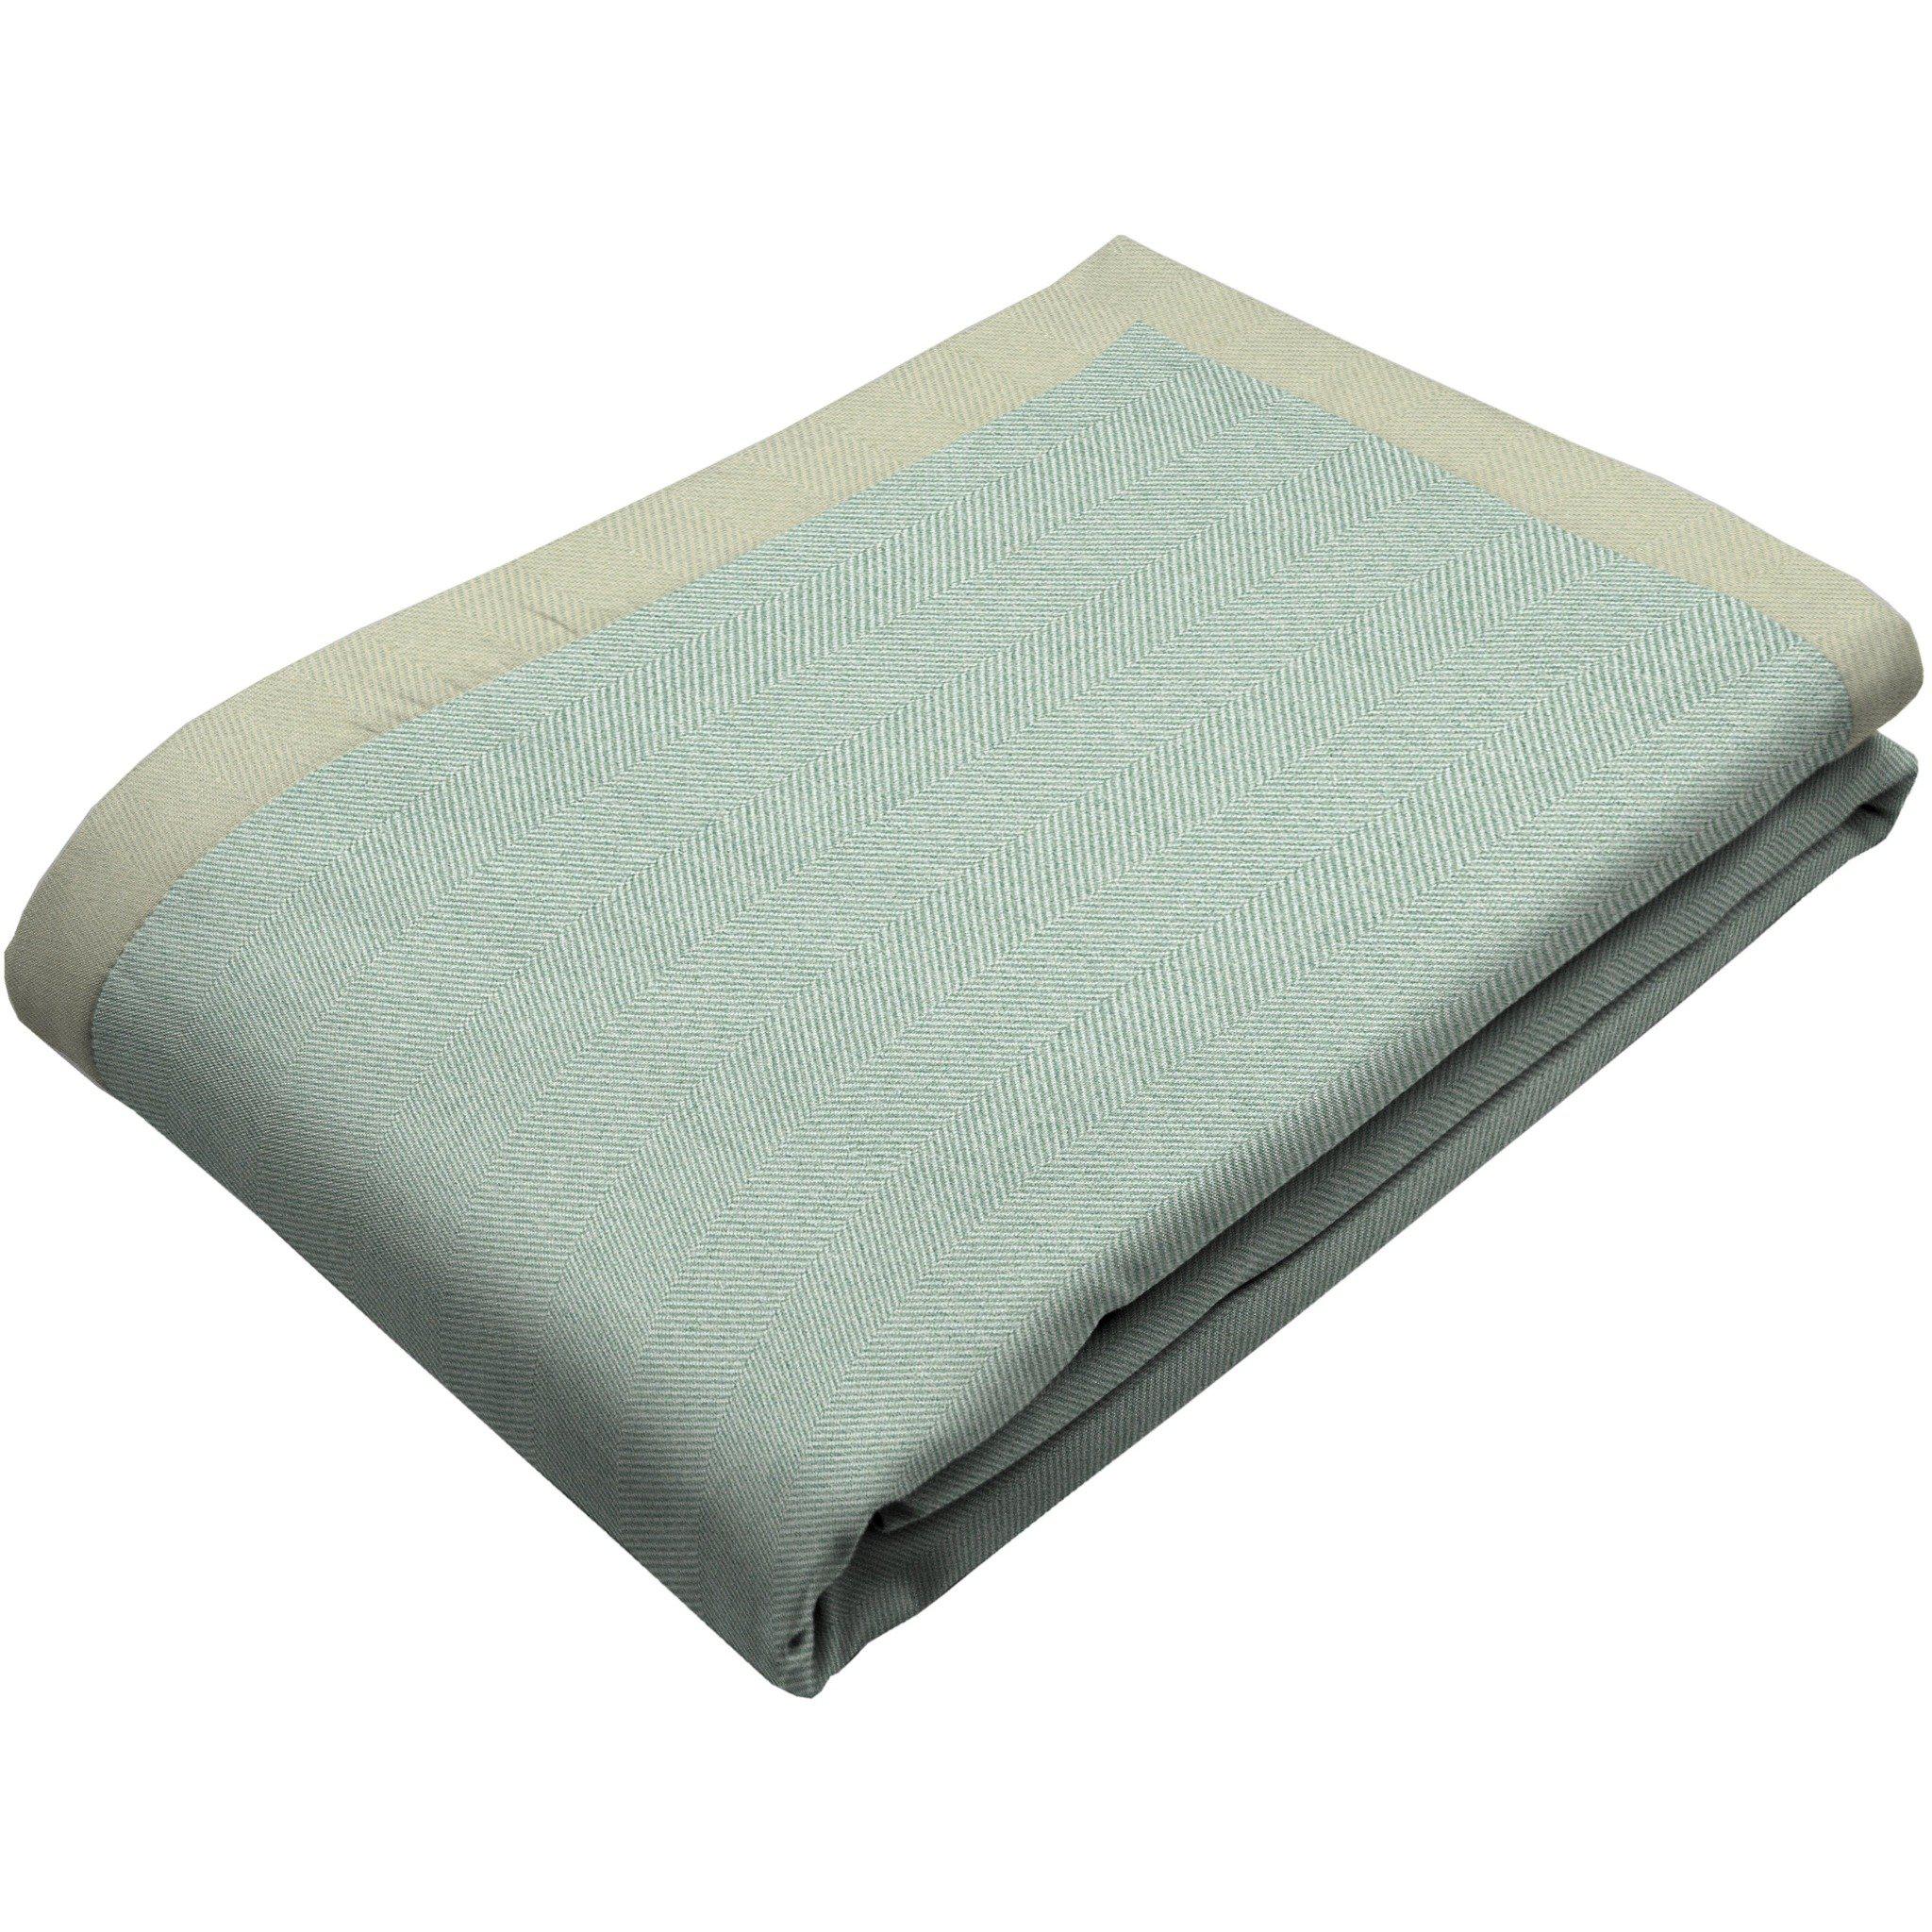 McAlister Textiles Herringbone Duck Egg Blue Throws & Runners Throws and Runners Bed Runner (50cm x 240cm) 